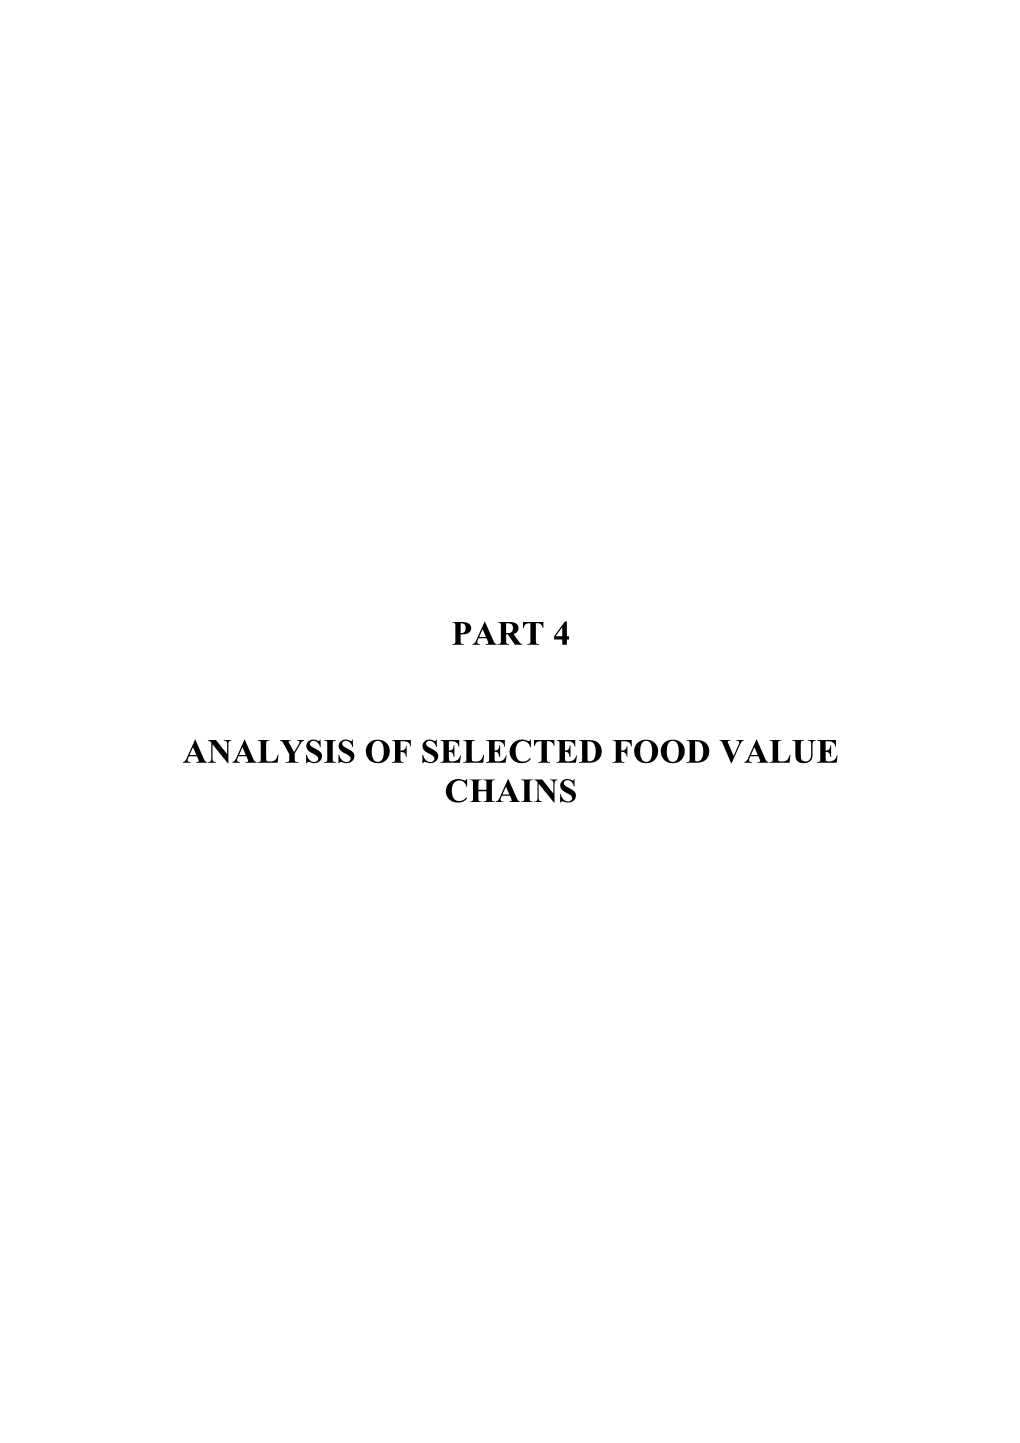 Part 4 Analysis of Selected Food Value Chains